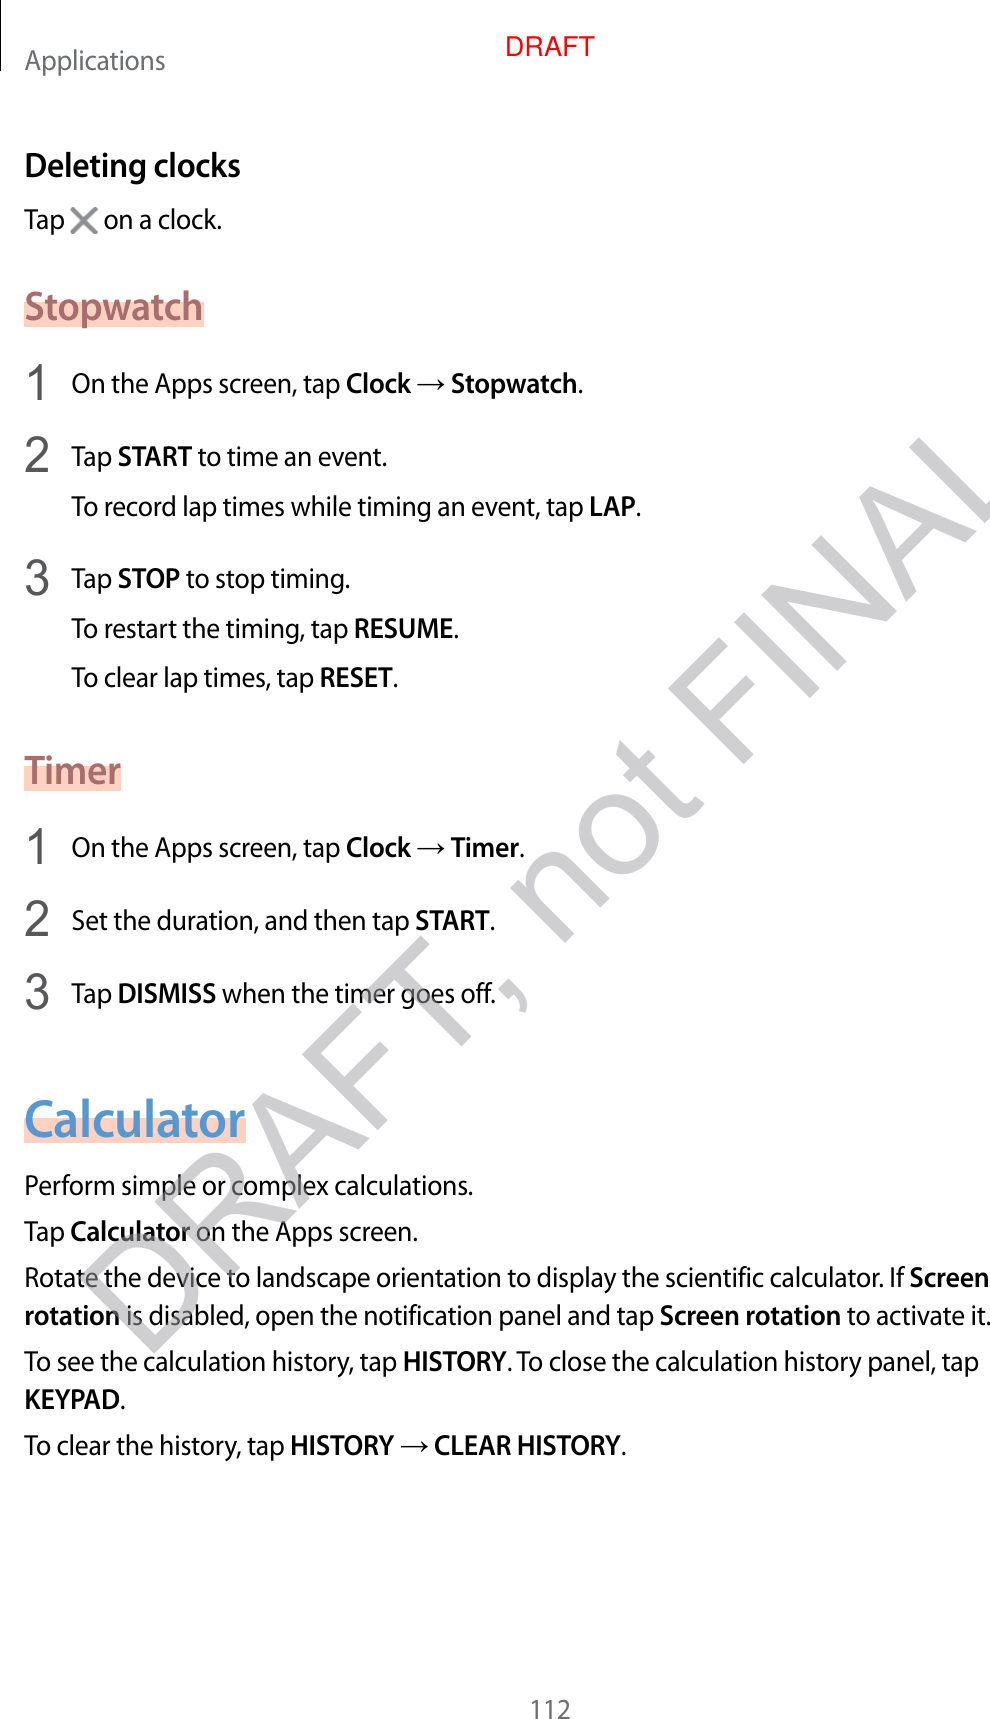 Applications112Deleting clocksTap   on a clock.Stopwatch1  On the Apps screen, tap Clock  Stopwatch.2  Tap START to time an event.To record lap times while timing an event, tap LAP.3  Tap STOP to stop timing.To restart the timing, tap RESUME.To clear lap times, tap RESET.Timer1  On the Apps screen, tap Clock  Timer.2  Set the duration, and then tap START.3  Tap DISMISS when the timer goes off.CalculatorPerform simple or complex calculations.Tap Calculator on the Apps screen.Rotate the device to landscape orientation to display the scientific calculator. If Screen rotation is disabled, open the notification panel and tap Screen rotation to activate it.To see the calculation history, tap HISTORY. To close the calculation history panel, tap KEYPAD.To clear the history, tap HISTORY  CLEAR HISTORY.DRAFT, not FINALDRAFT